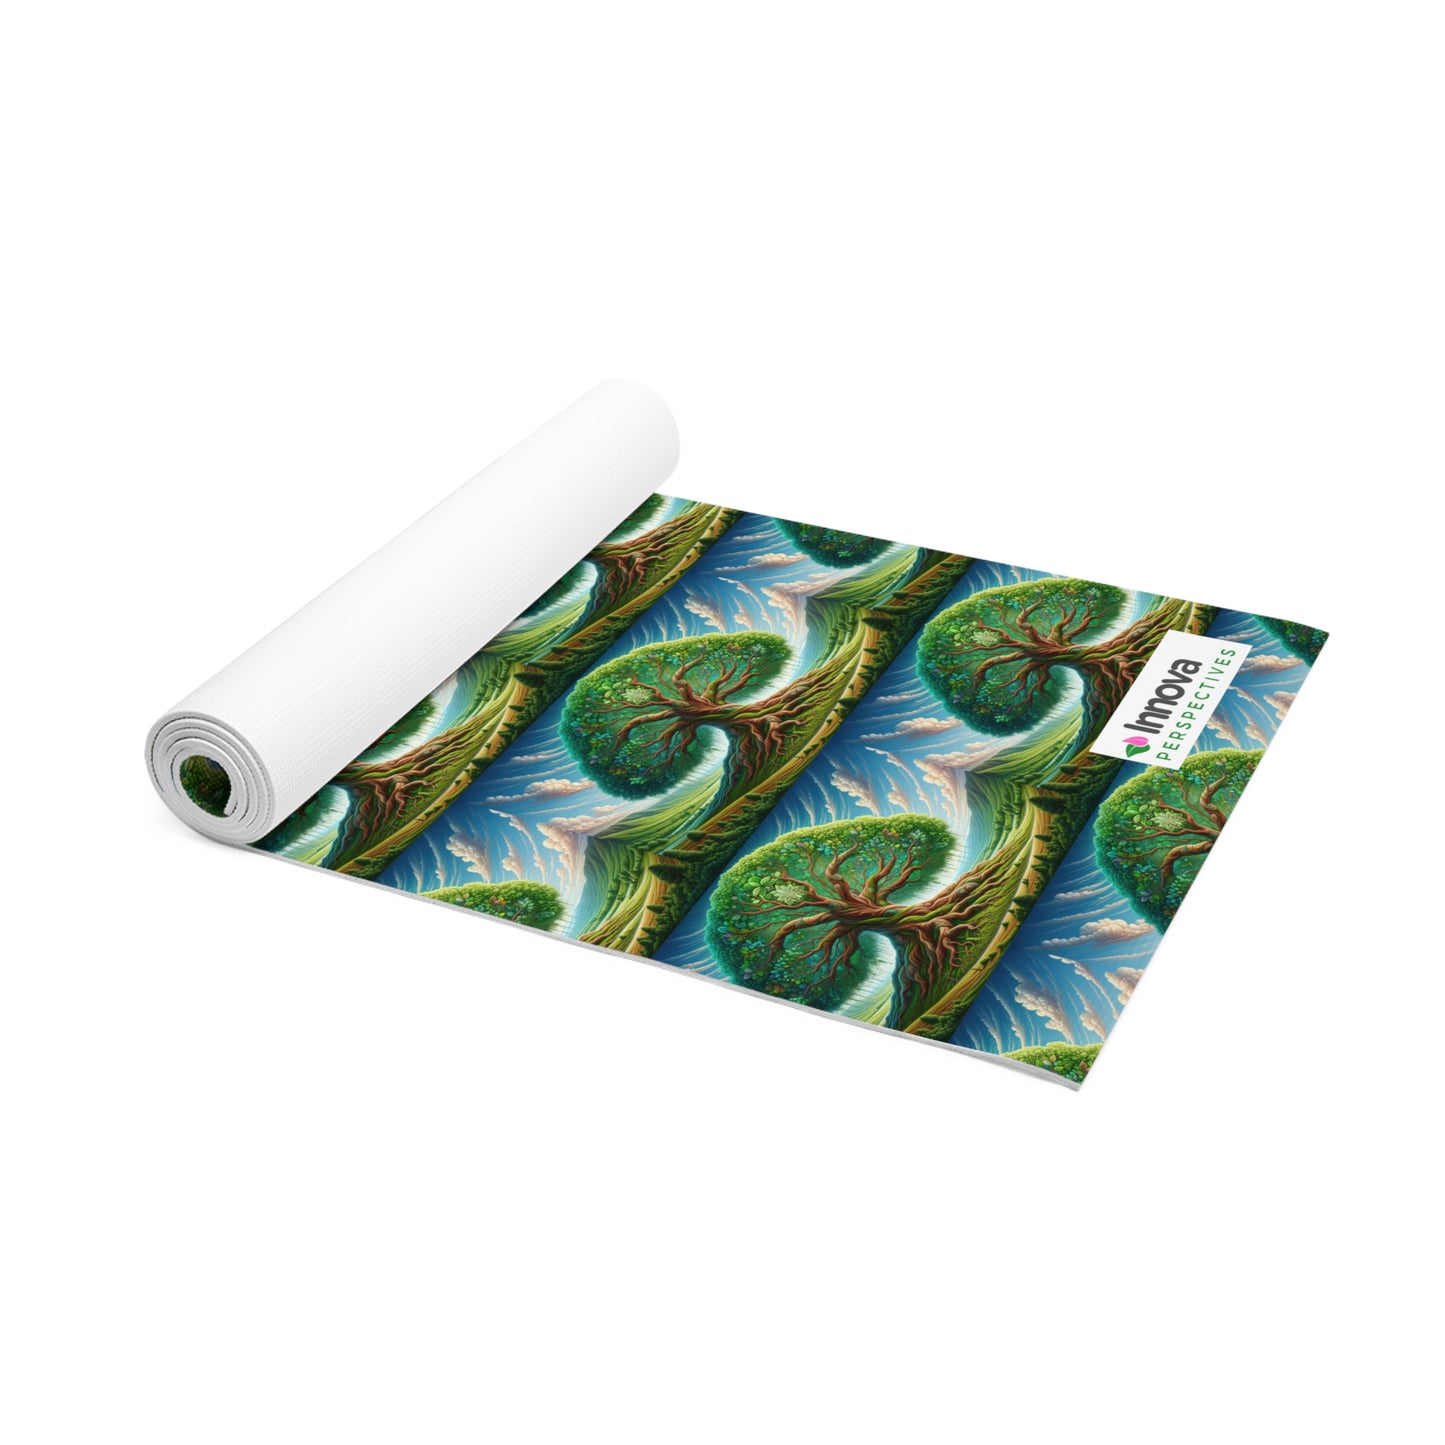 -Experience Serenity with Our Deluxe Foam Yoga Mat & Sacred Tree of Life Imagery